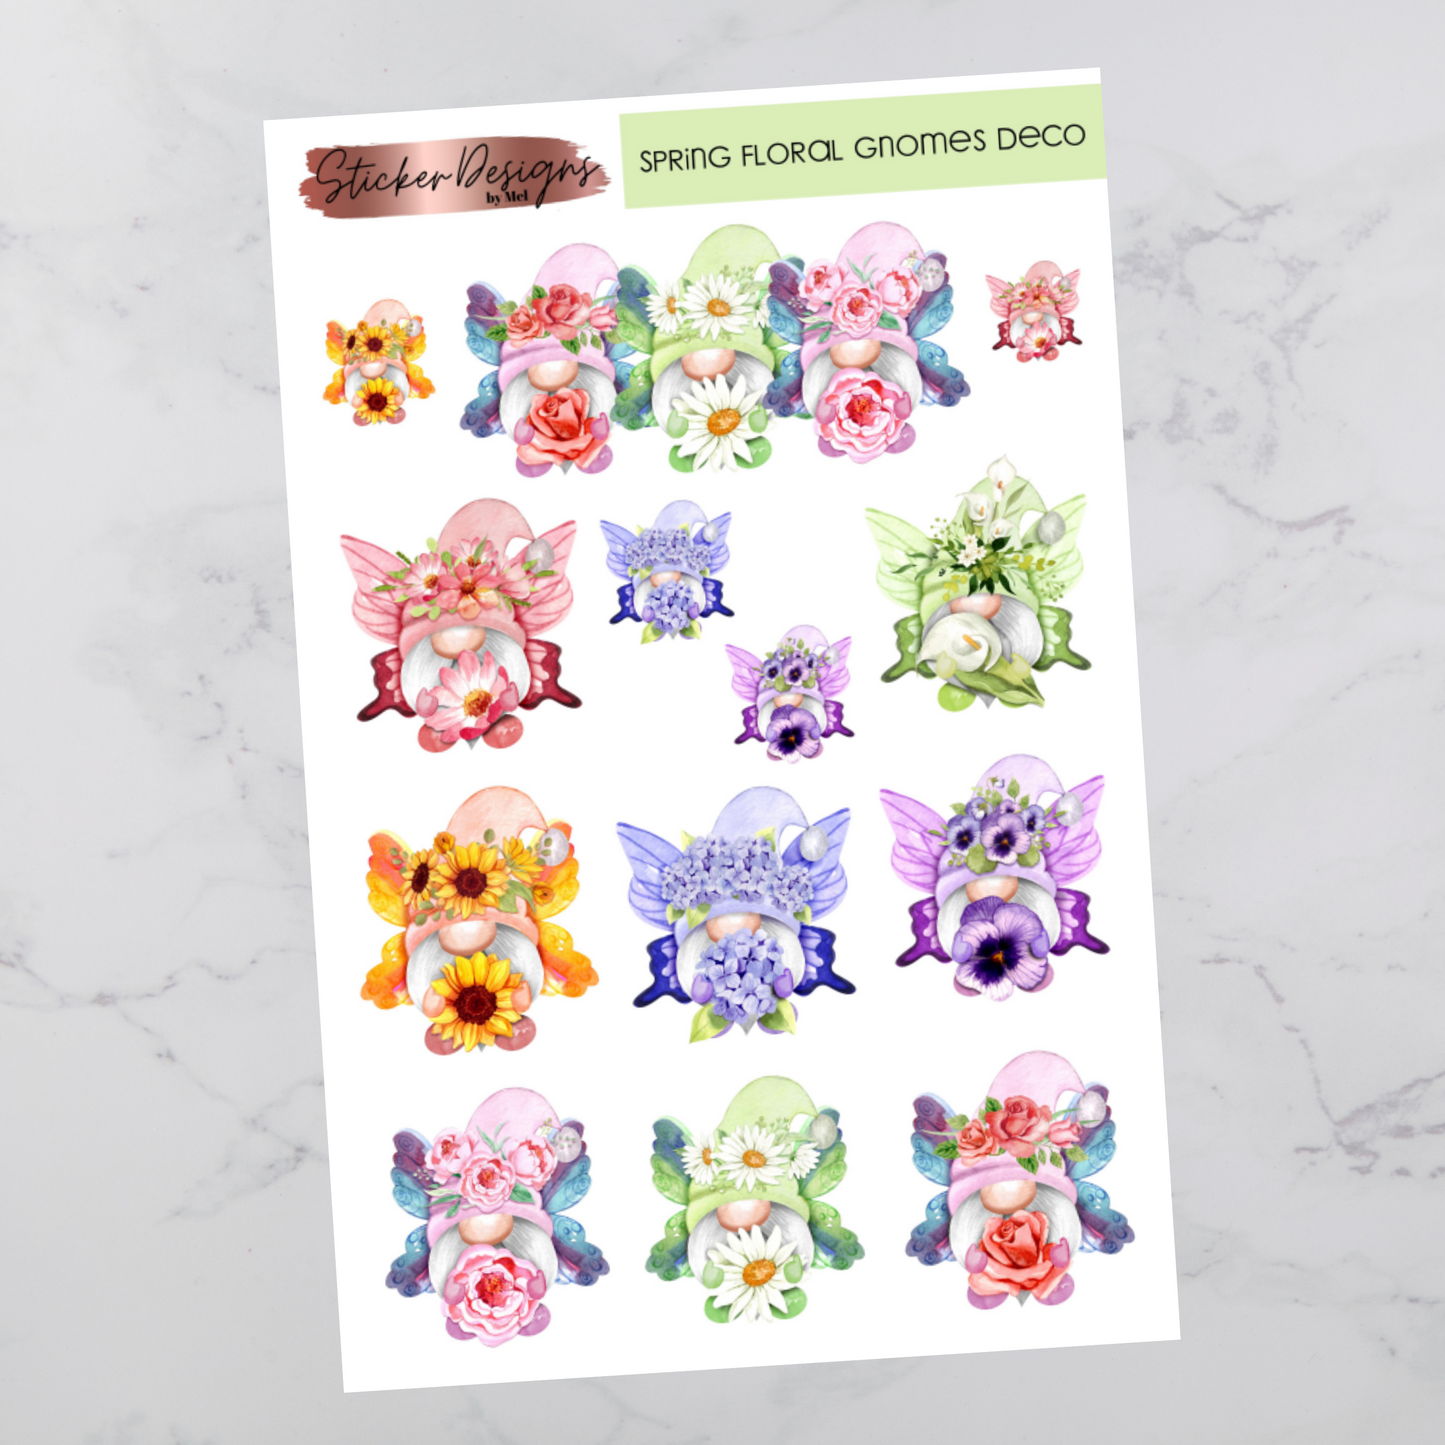 Spring Floral Gnomes  - Deco Stickers